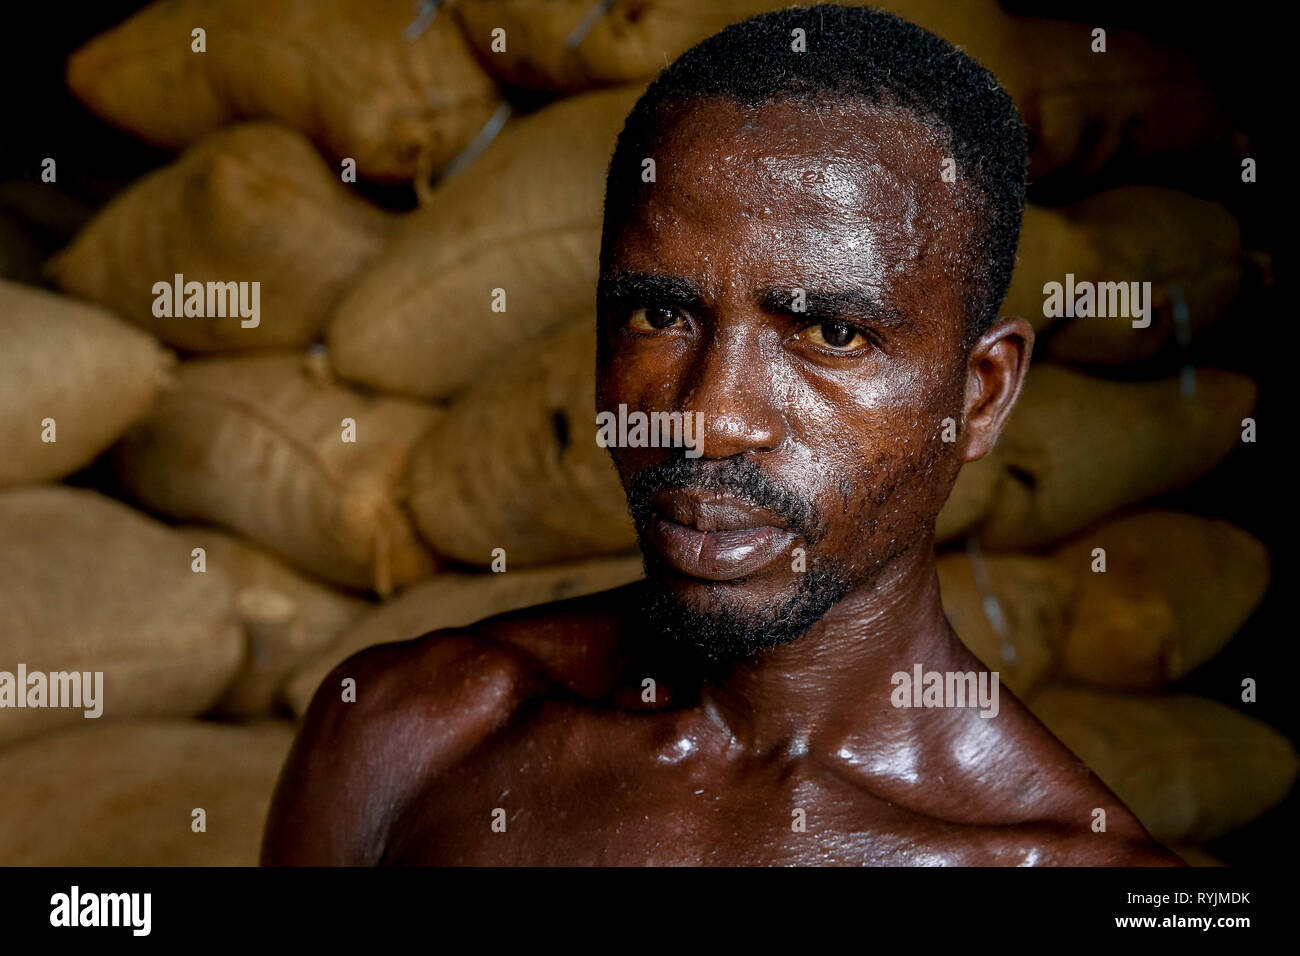 Cocoa worker in Agboville, Ivory Coast. Stock Photo